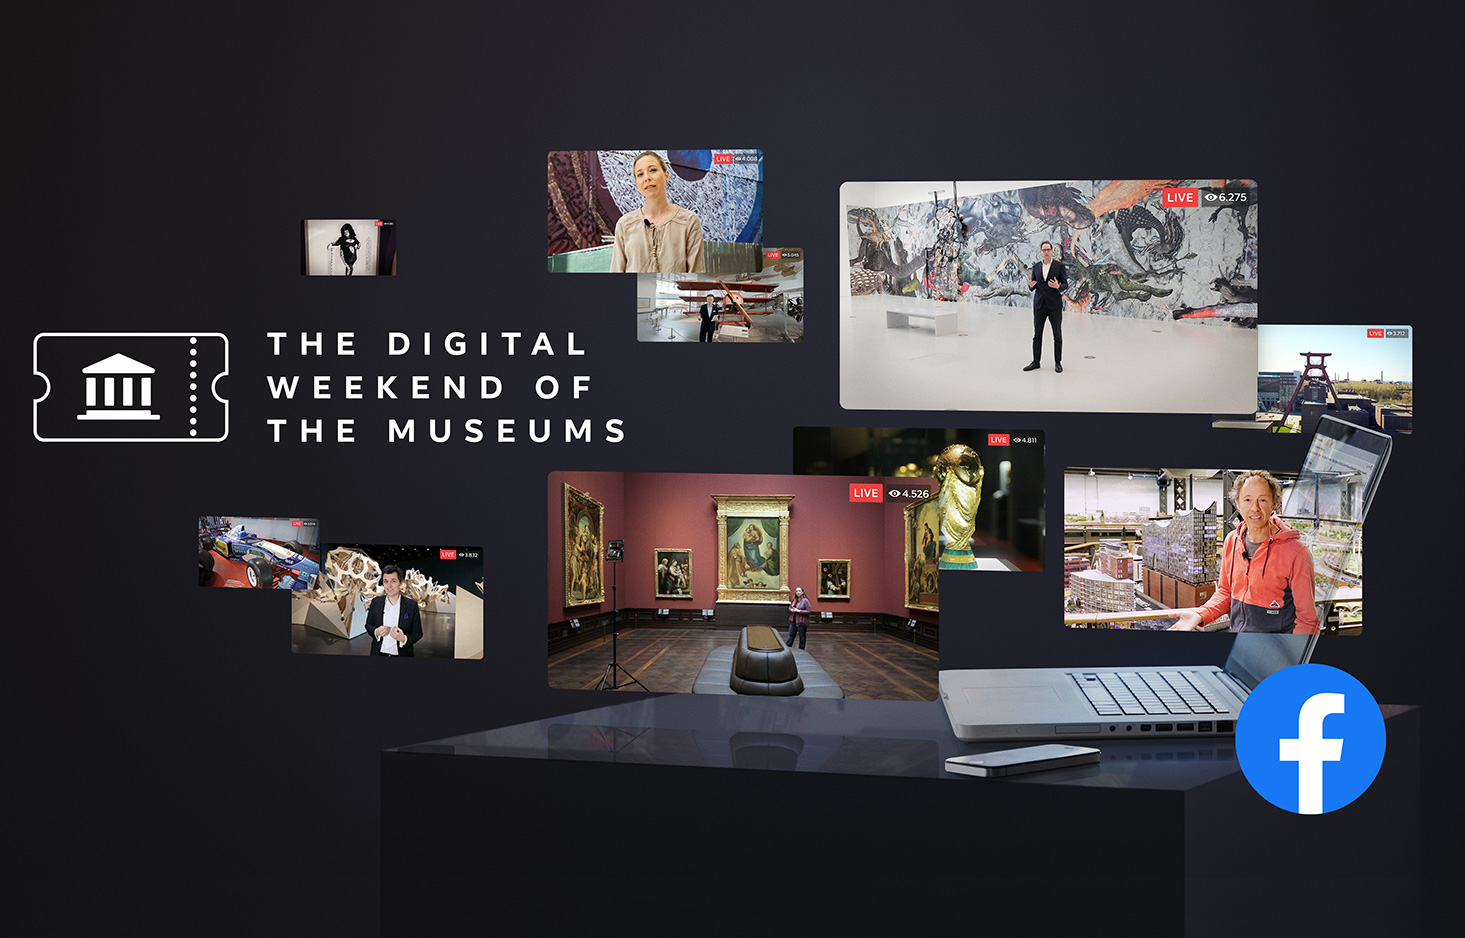 The Digital Weekend of the Museums